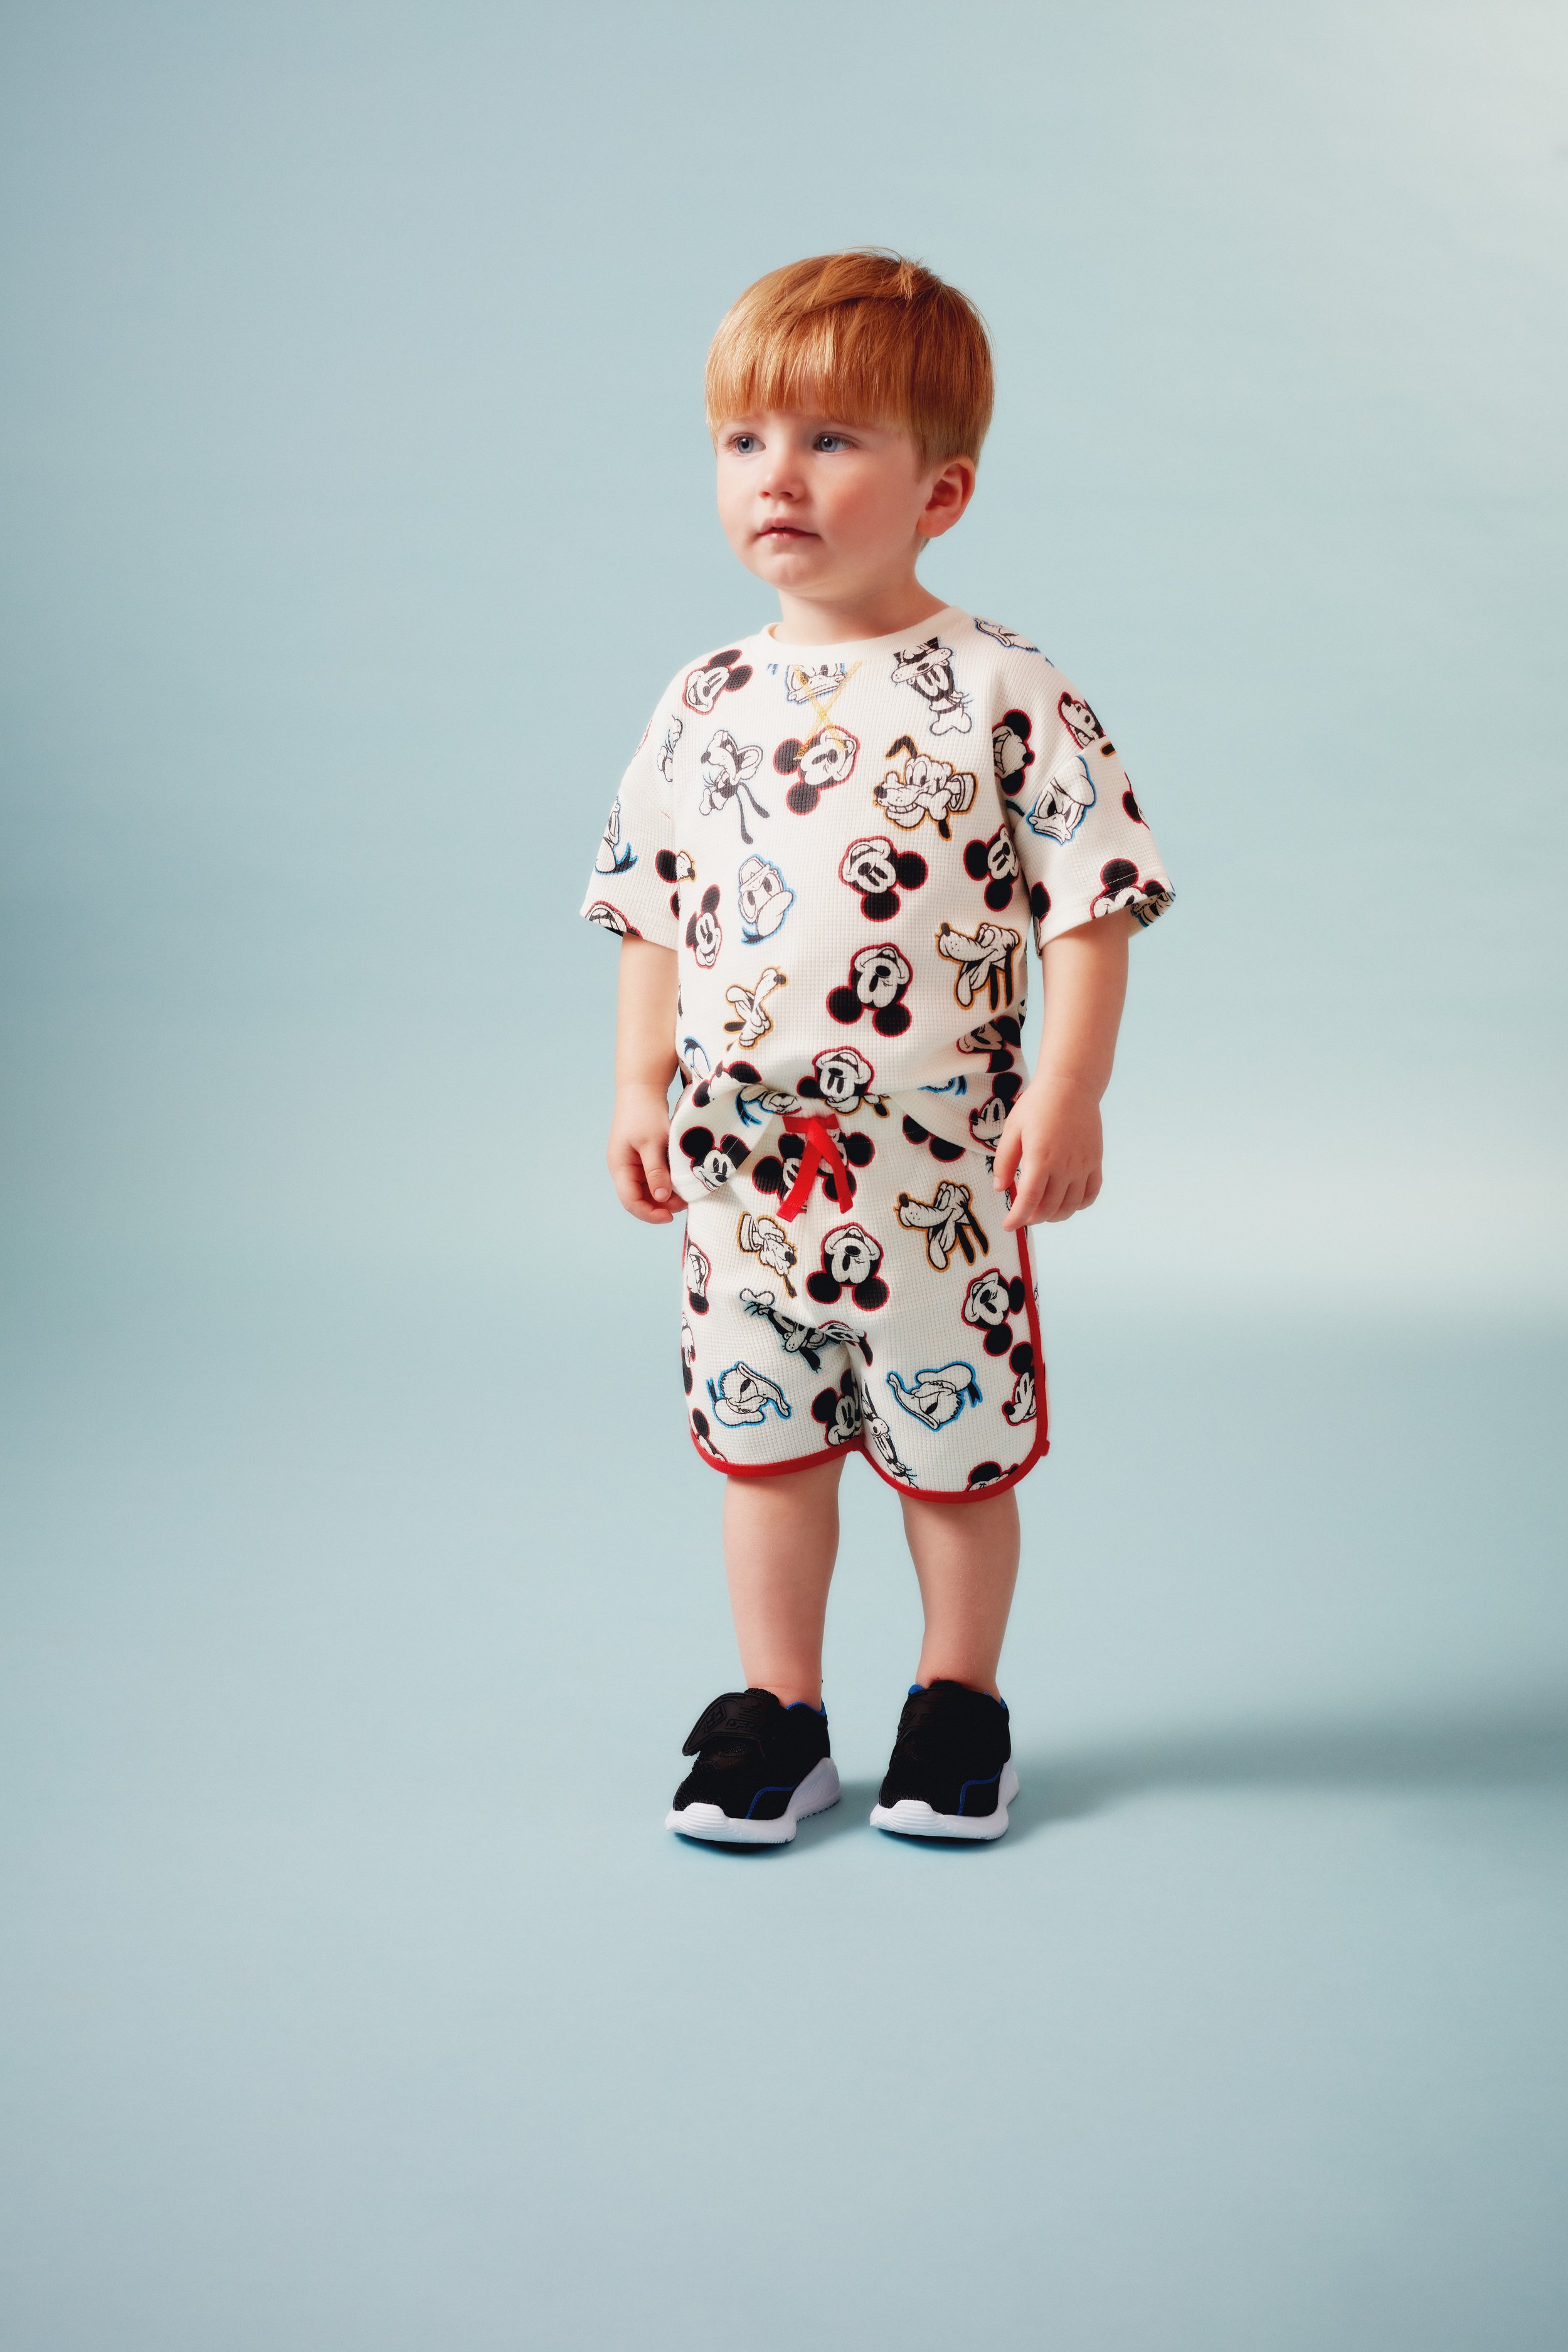 primark-primark_kids_mickey_mouse_waffle_top_and_shorts_set_10_13_16-ref1467138.jpg